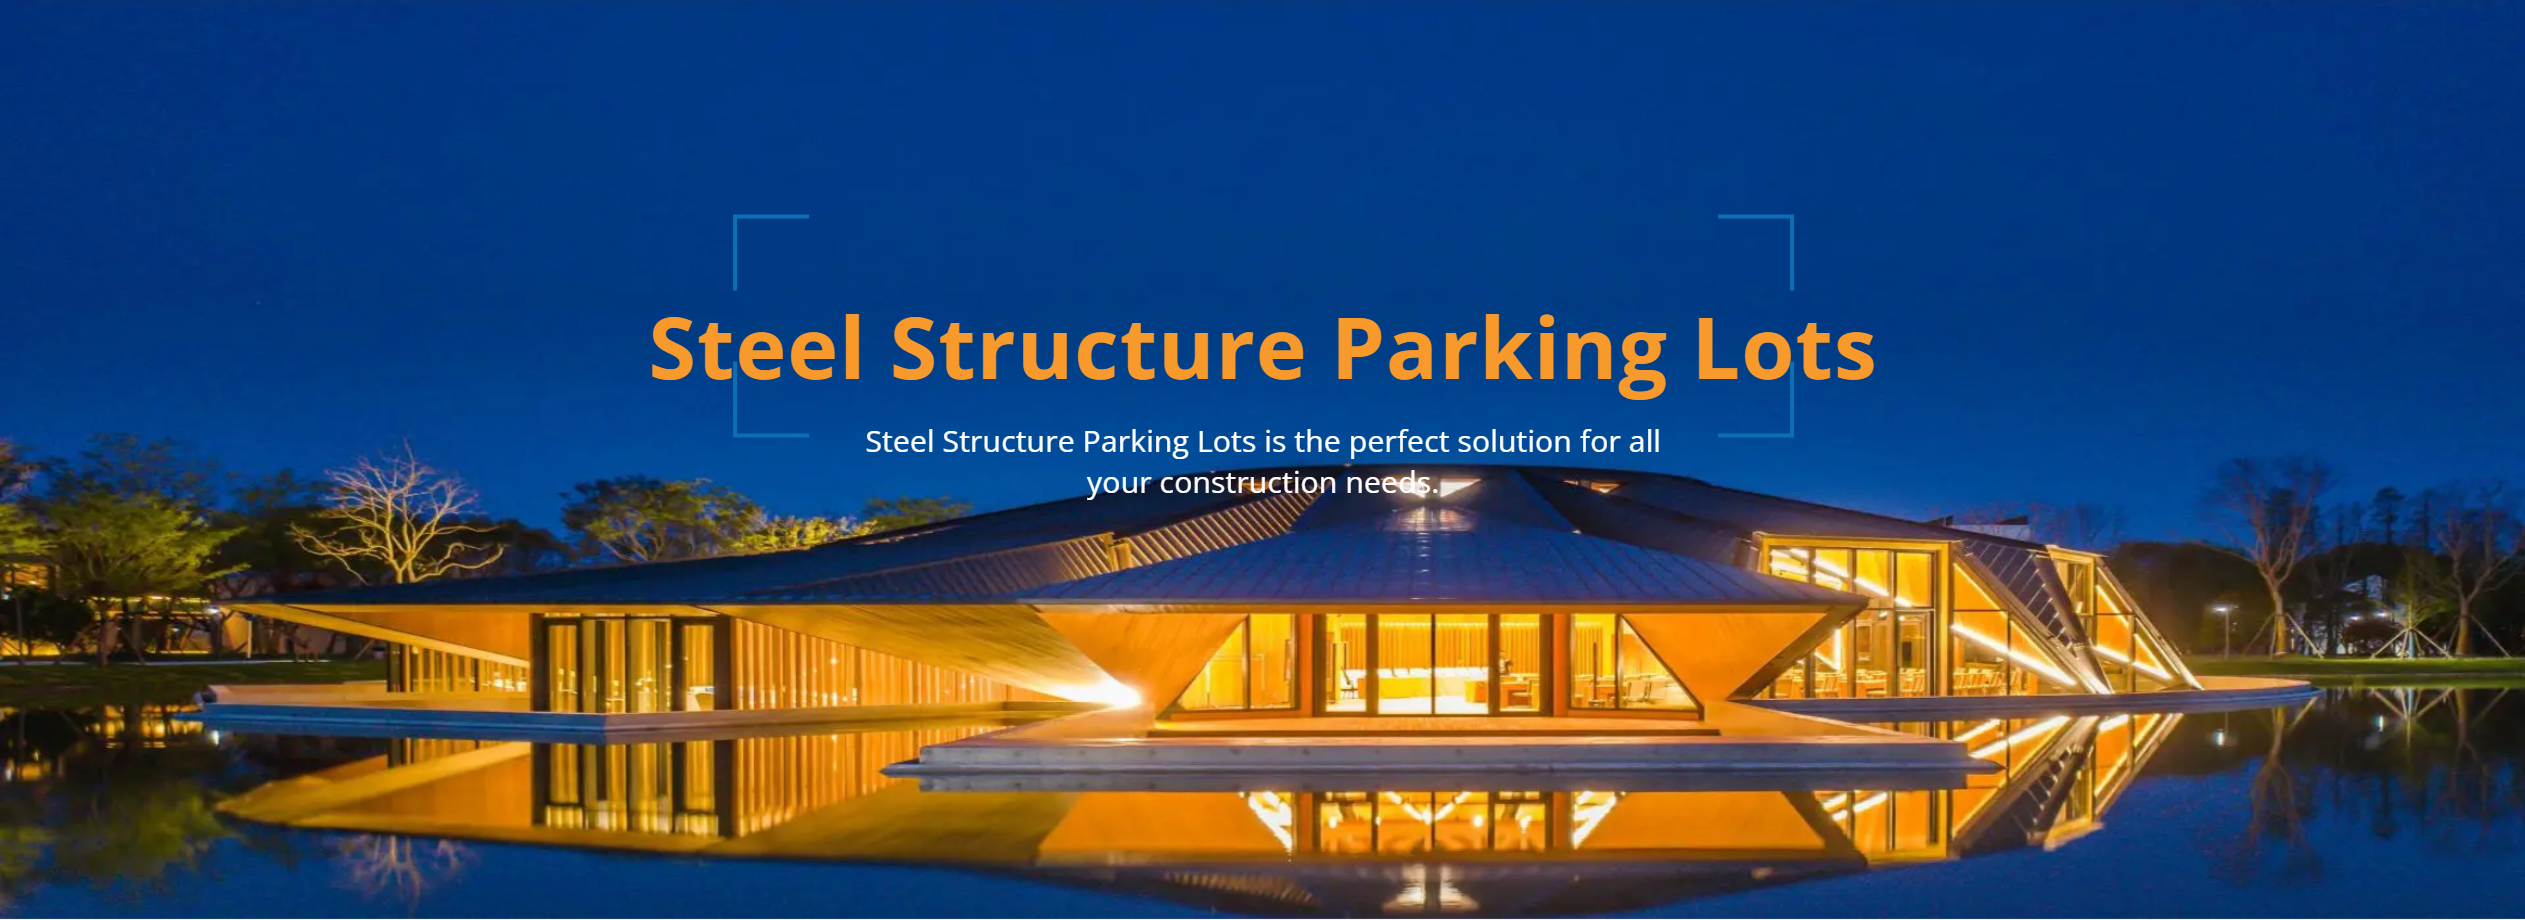 Steel-Structure-Parking-Lots-banner